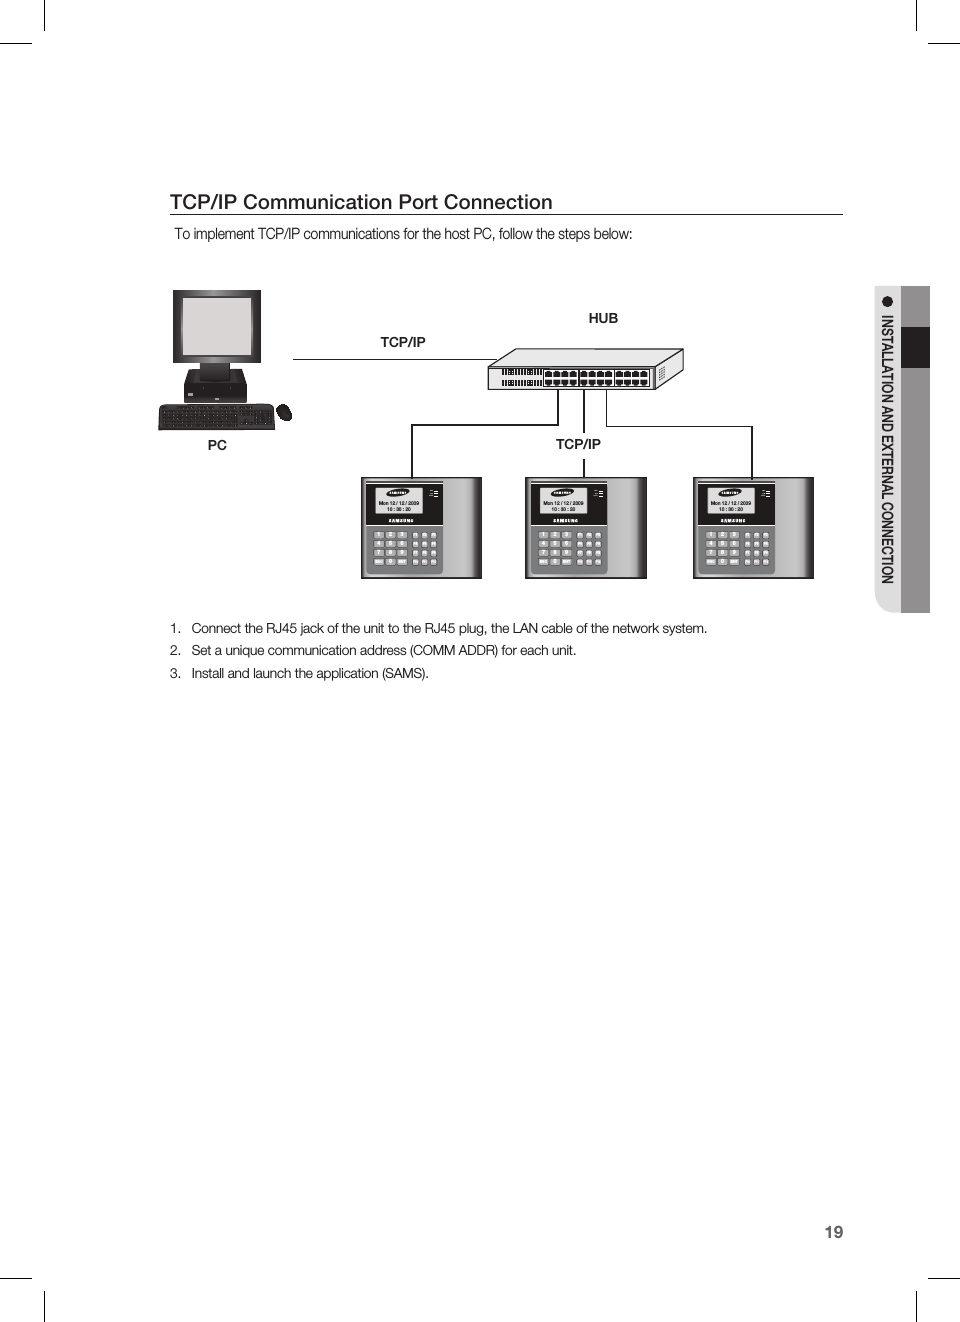 English19INSTALLATION AND EXTERNAL CONNECTIONTCP/IP Communication Port ConnectionTo implement TCP/IP communications for the host PC, follow the steps below:Connect the RJ45 jack of the unit to the RJ45 plug, the LAN cable of the network system.Set a unique communication address (COMM ADDR) for each unit.Install and launch the application (SAMS).1.2.3.1 326547 98ESC 0ENTF1F2F3F4F5F6F7F8F9F10 F11 F12Mon 12 / 12 / 200910 : 30 : 20183&quot;-.%0031 326547 98ESC 0ENTF1F2F3F4F5F6F7F8F9F10 F11 F12Mon 12 / 12 / 200910 : 30 : 20183&quot;-.%0031 326547 98ESC 0ENTF1F2F3F4F5F6F7F8F9F10 F11 F12Mon 12 / 12 / 200910 : 30 : 20183&quot;-.%003HUBTCP/IPPC TCP/IP